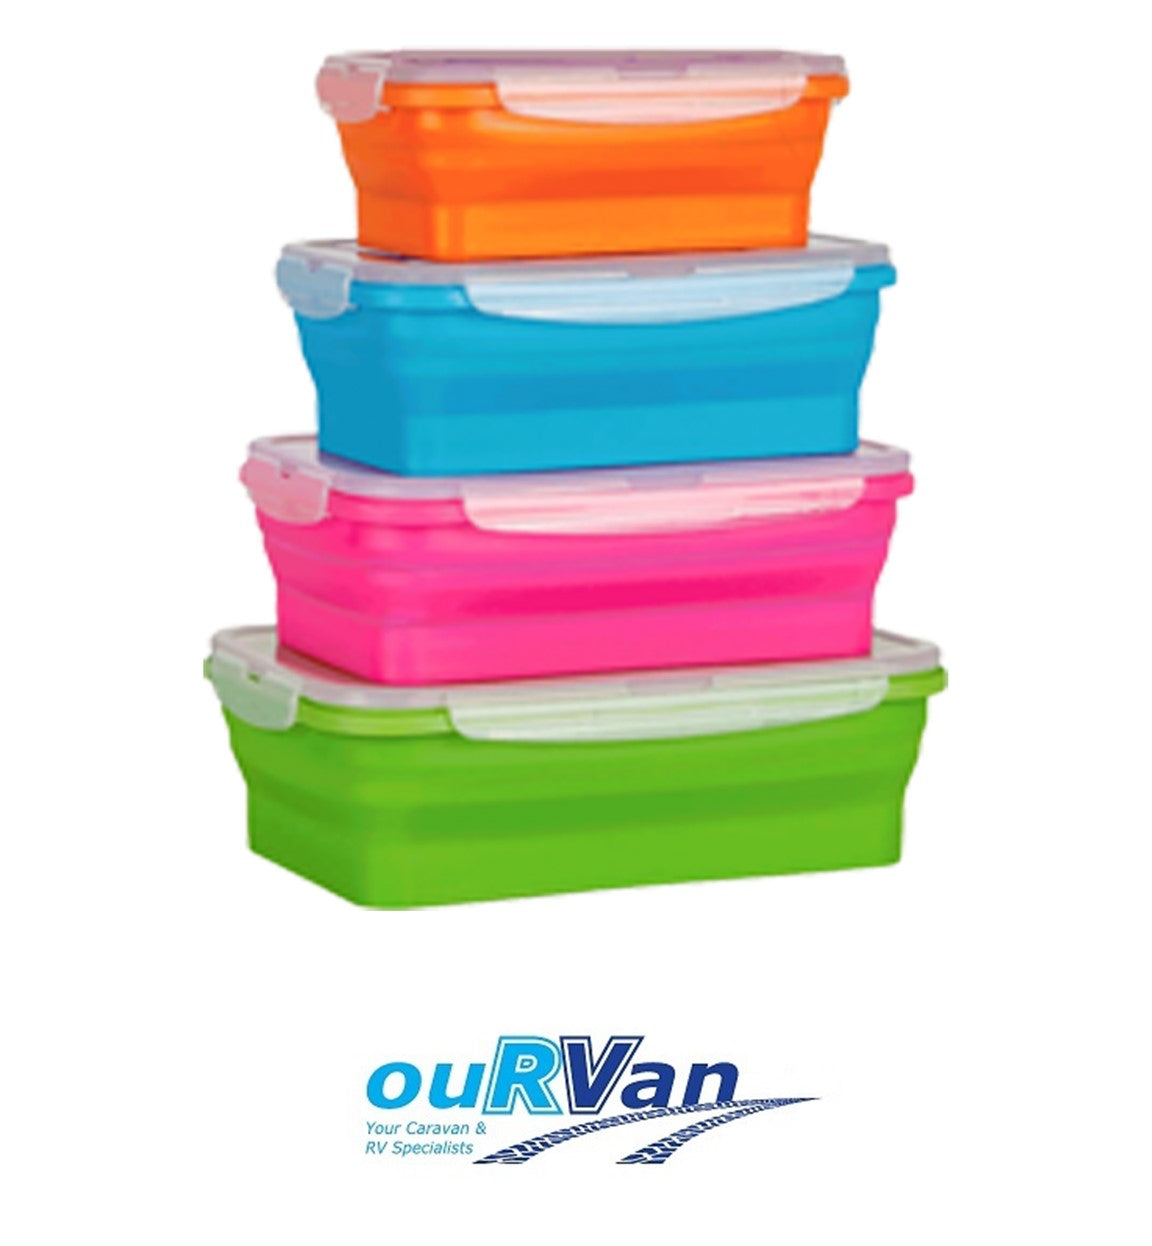 SET OF 4 COLLAPSIBLE RECTANGLULAR CONTAINERS